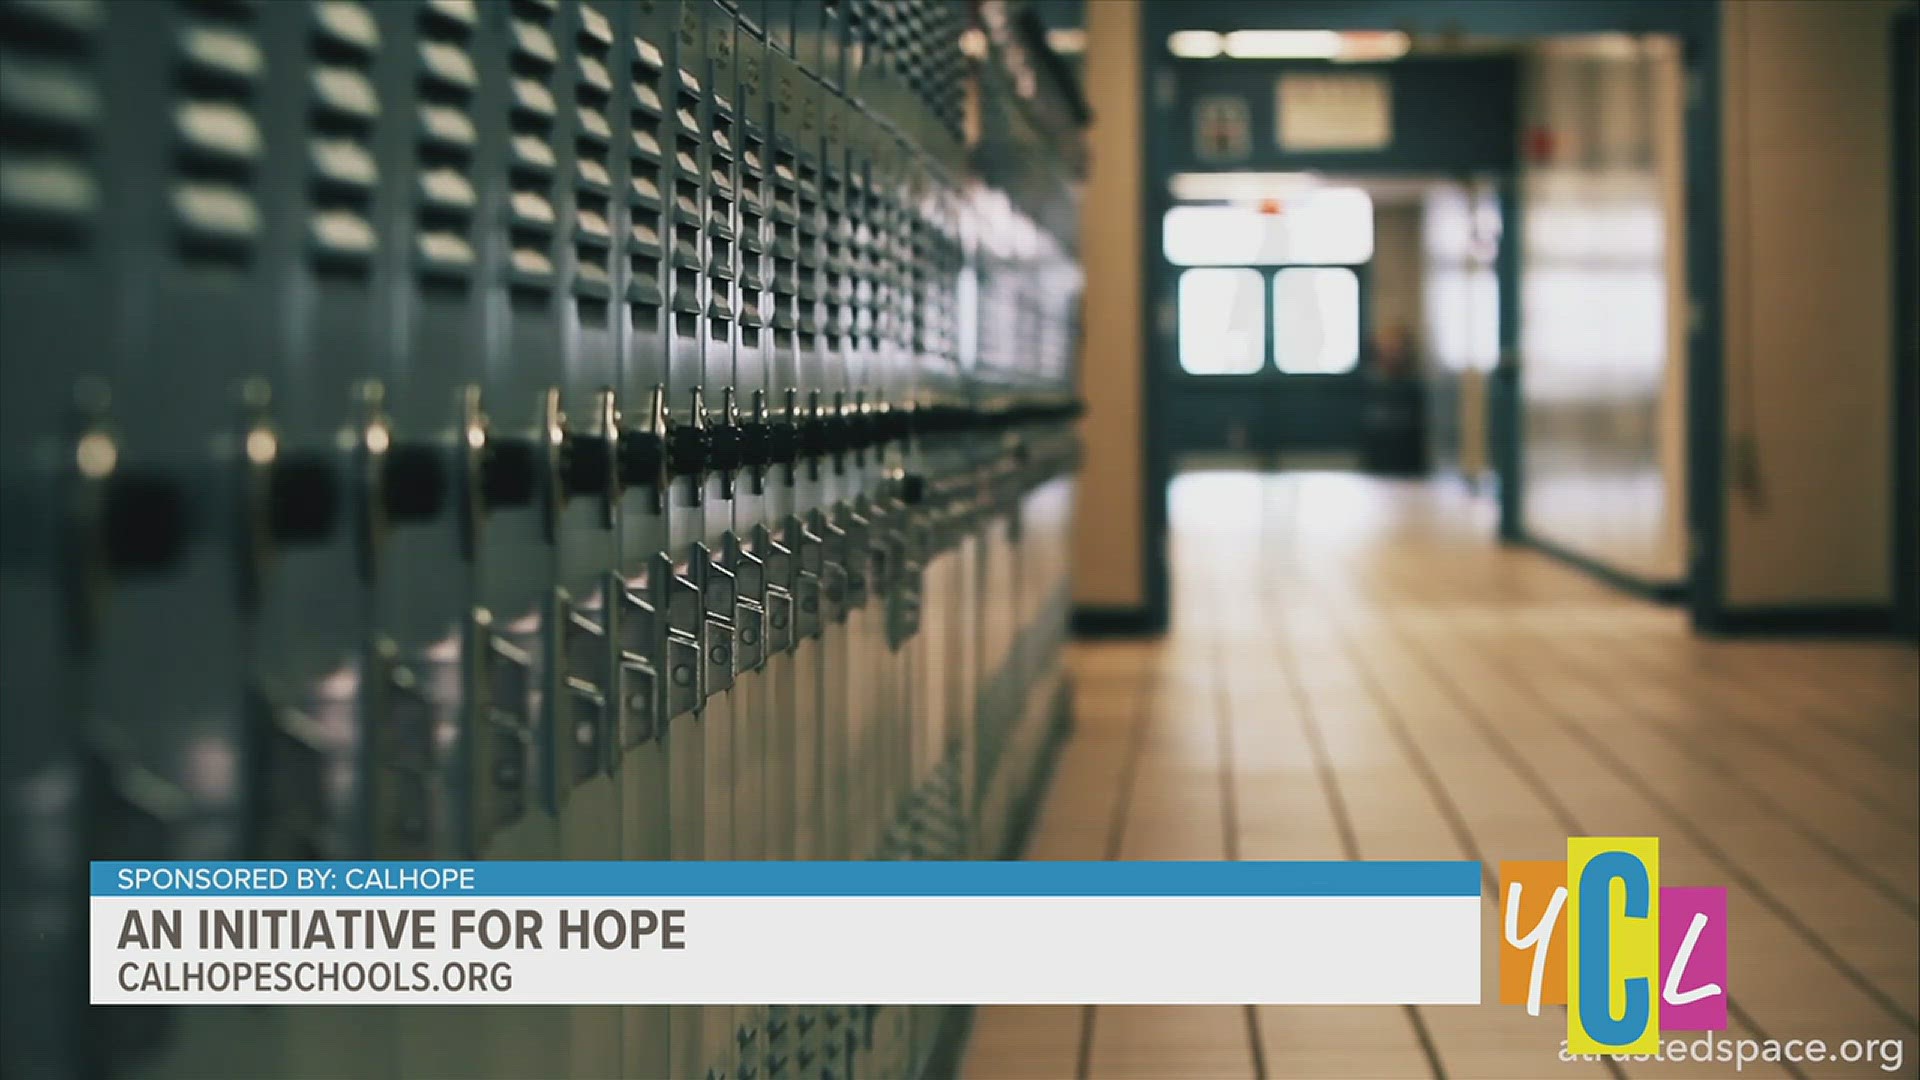 An initiative for HOPE is launching at no cost to California's schools. This segment paid for by CalHOPE.